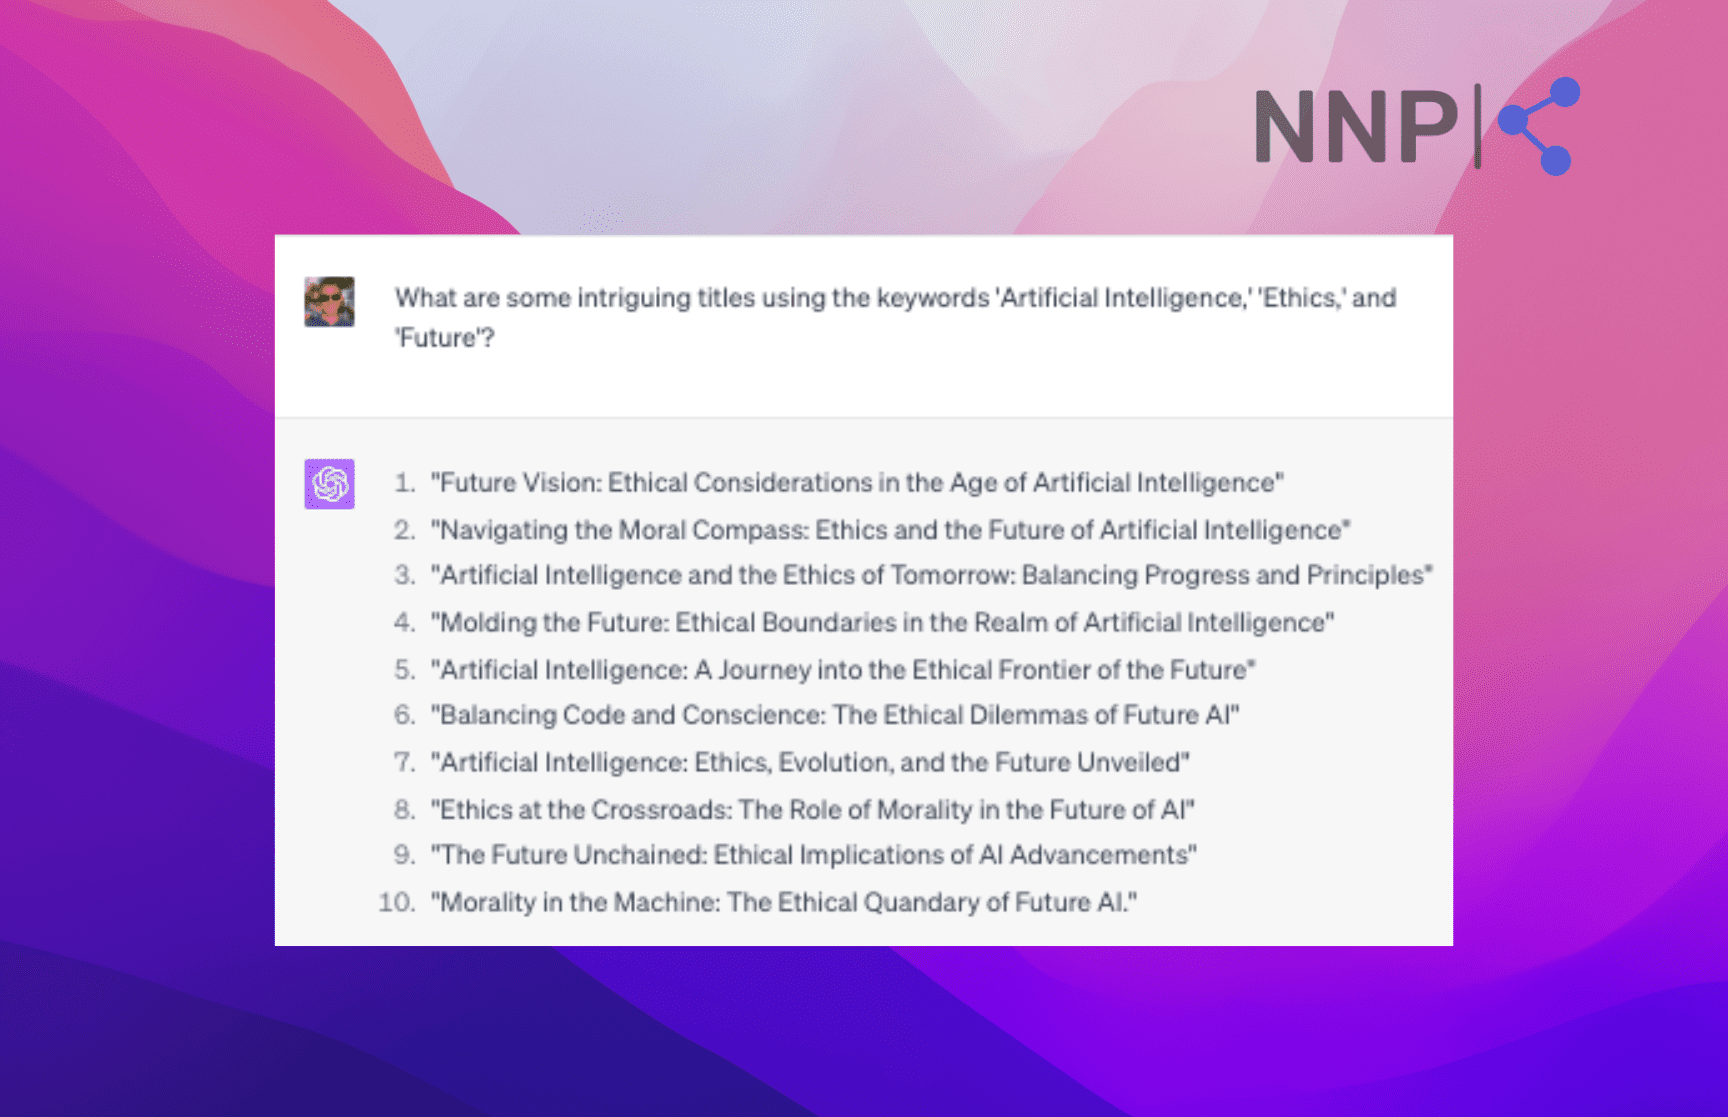 "What are some intriguing titles using the keywords 'Artificial Intelligence,' 'Ethics,' and 'Future'?"